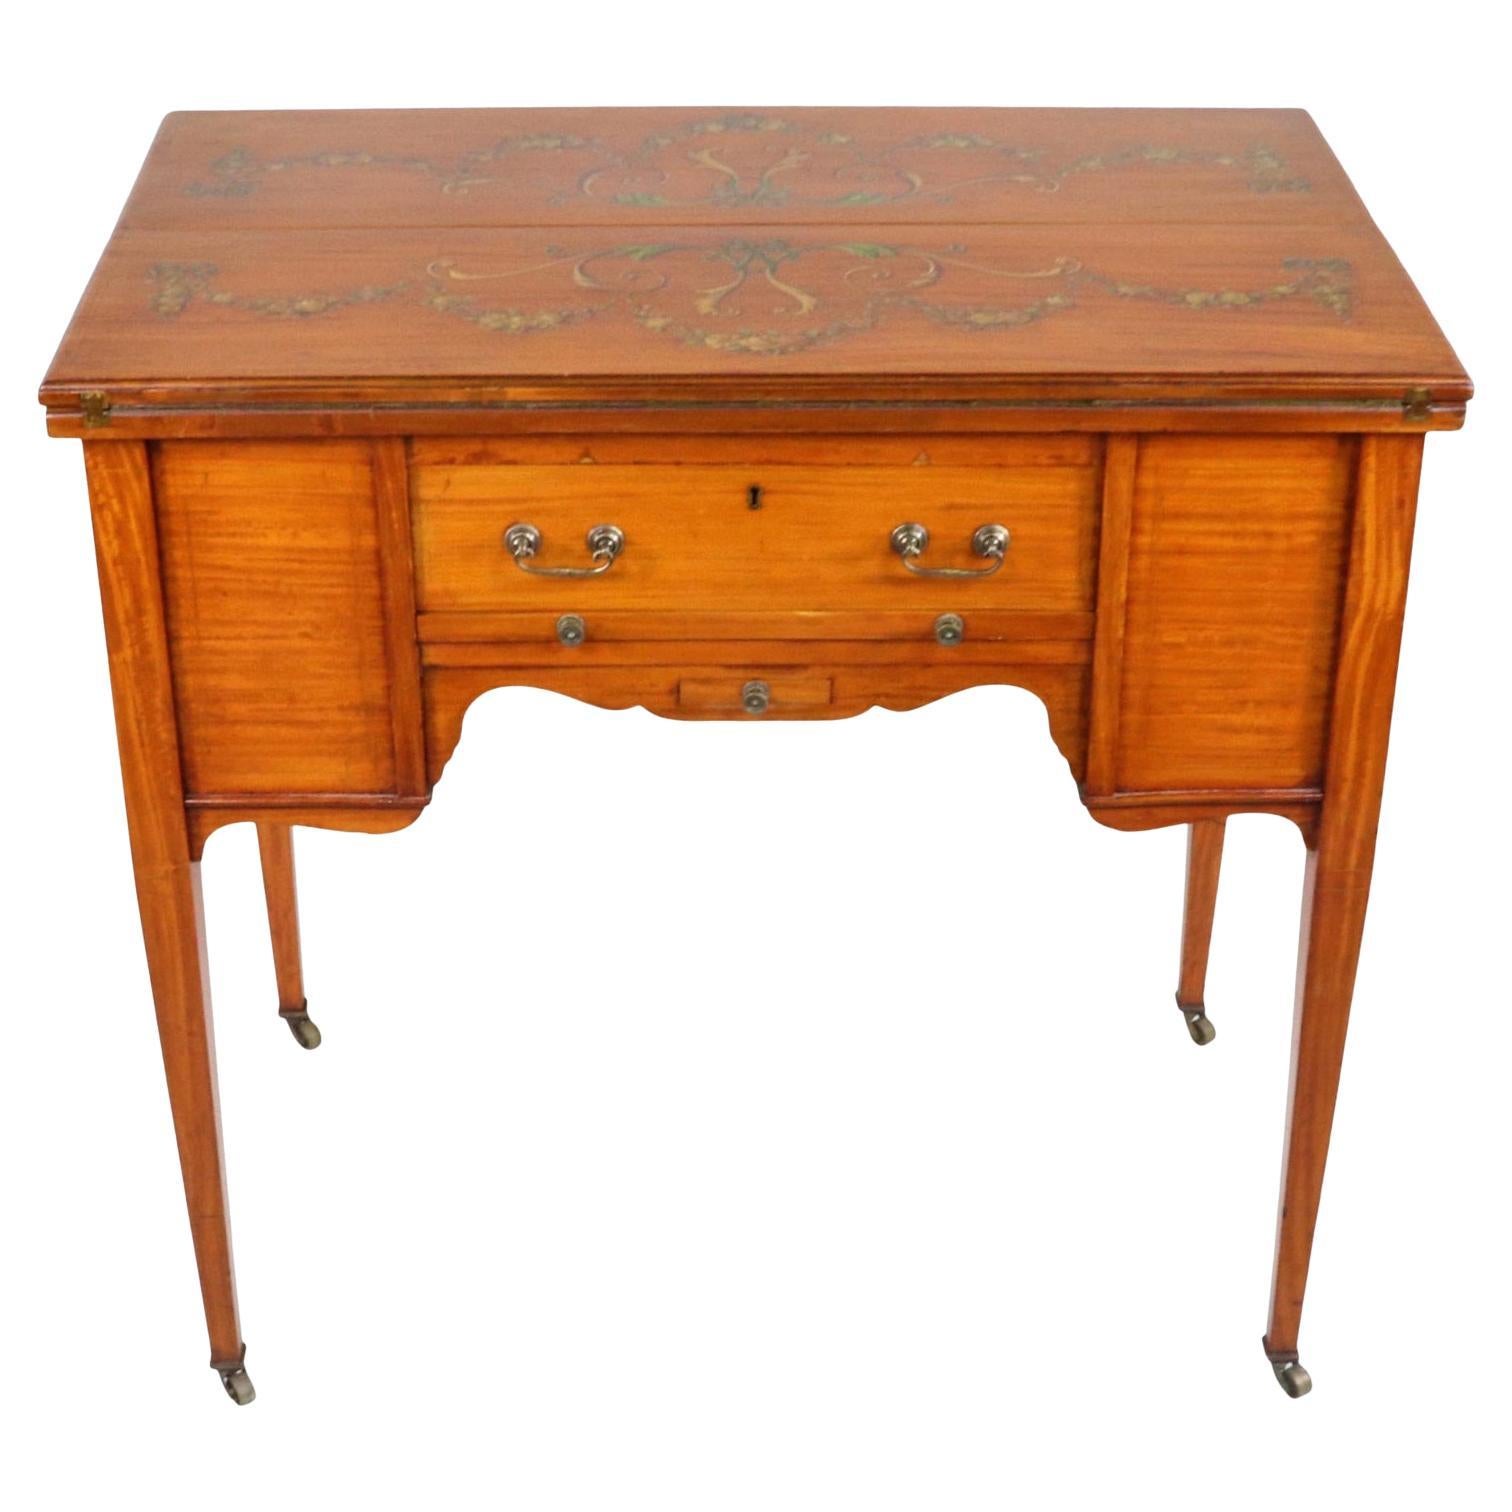 Edwardian Satinwood Hand-Painted Metamorphic Game Table For Sale